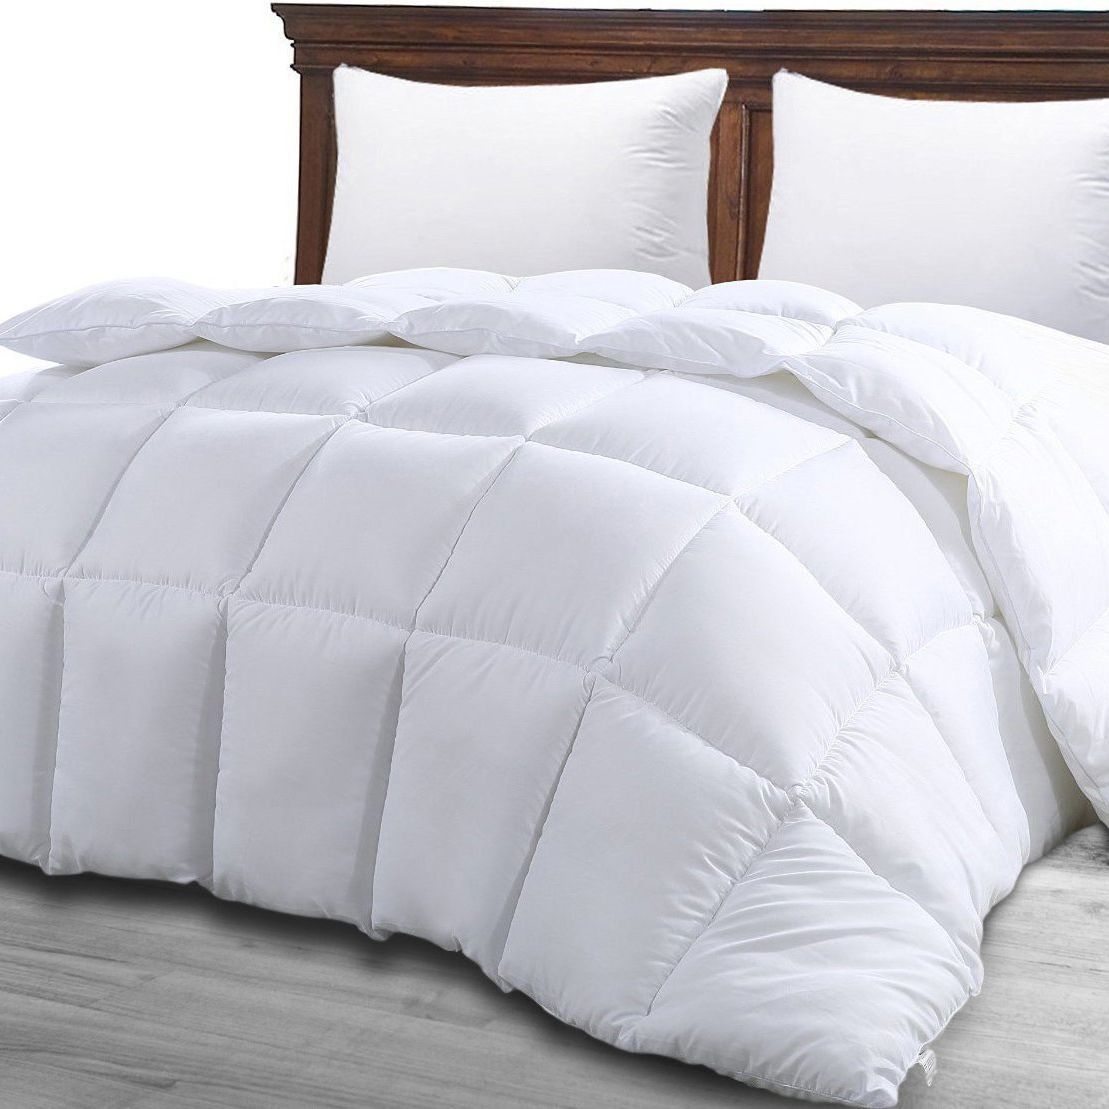 Details about   Soft Smooth Comforter Queen Size All Seasons 2000 Series Lightweight Warm Winter 